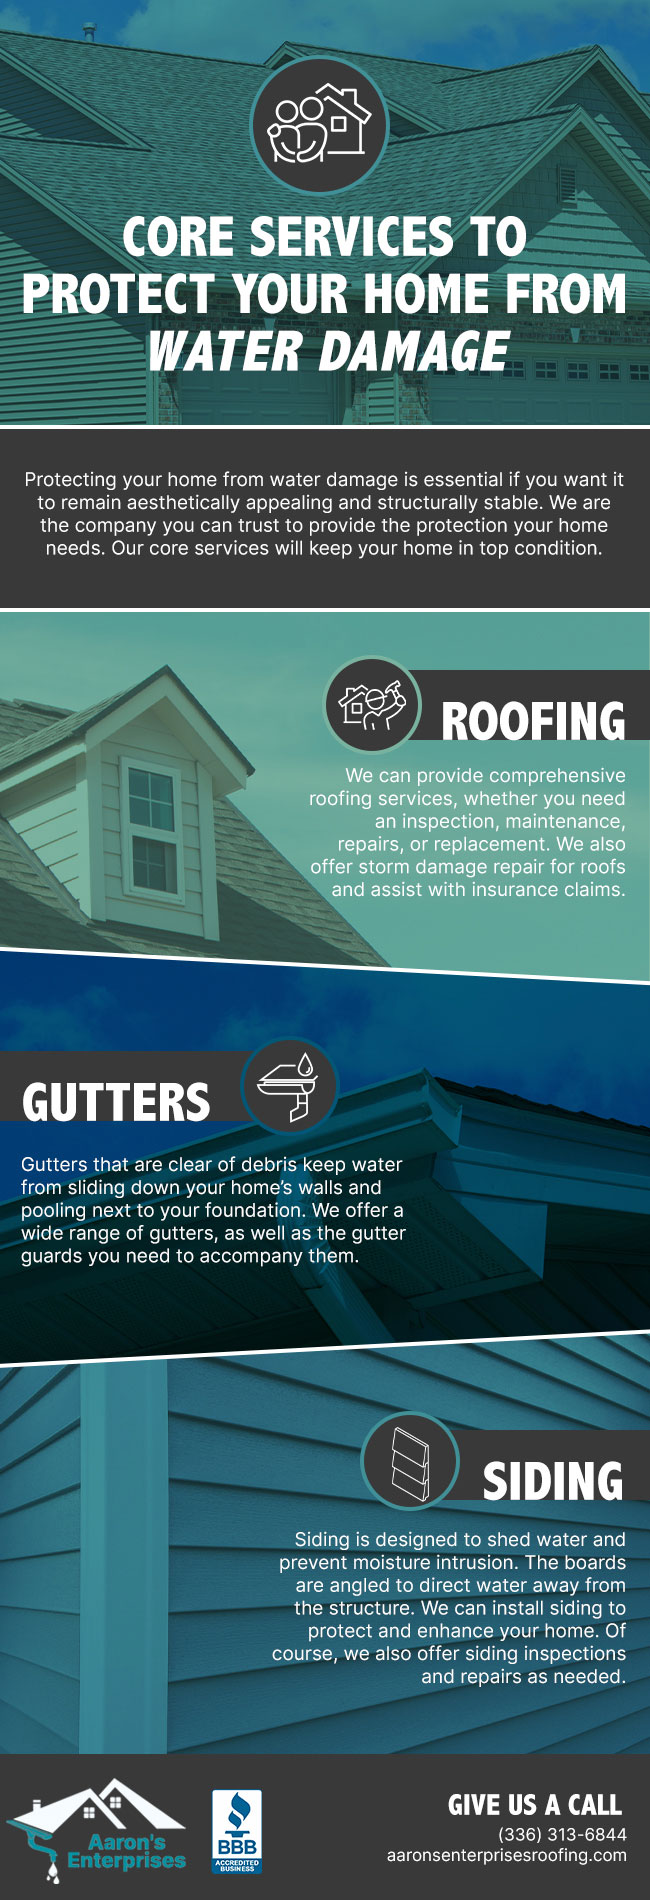 Core Services to Protect Your Home from Water Damage